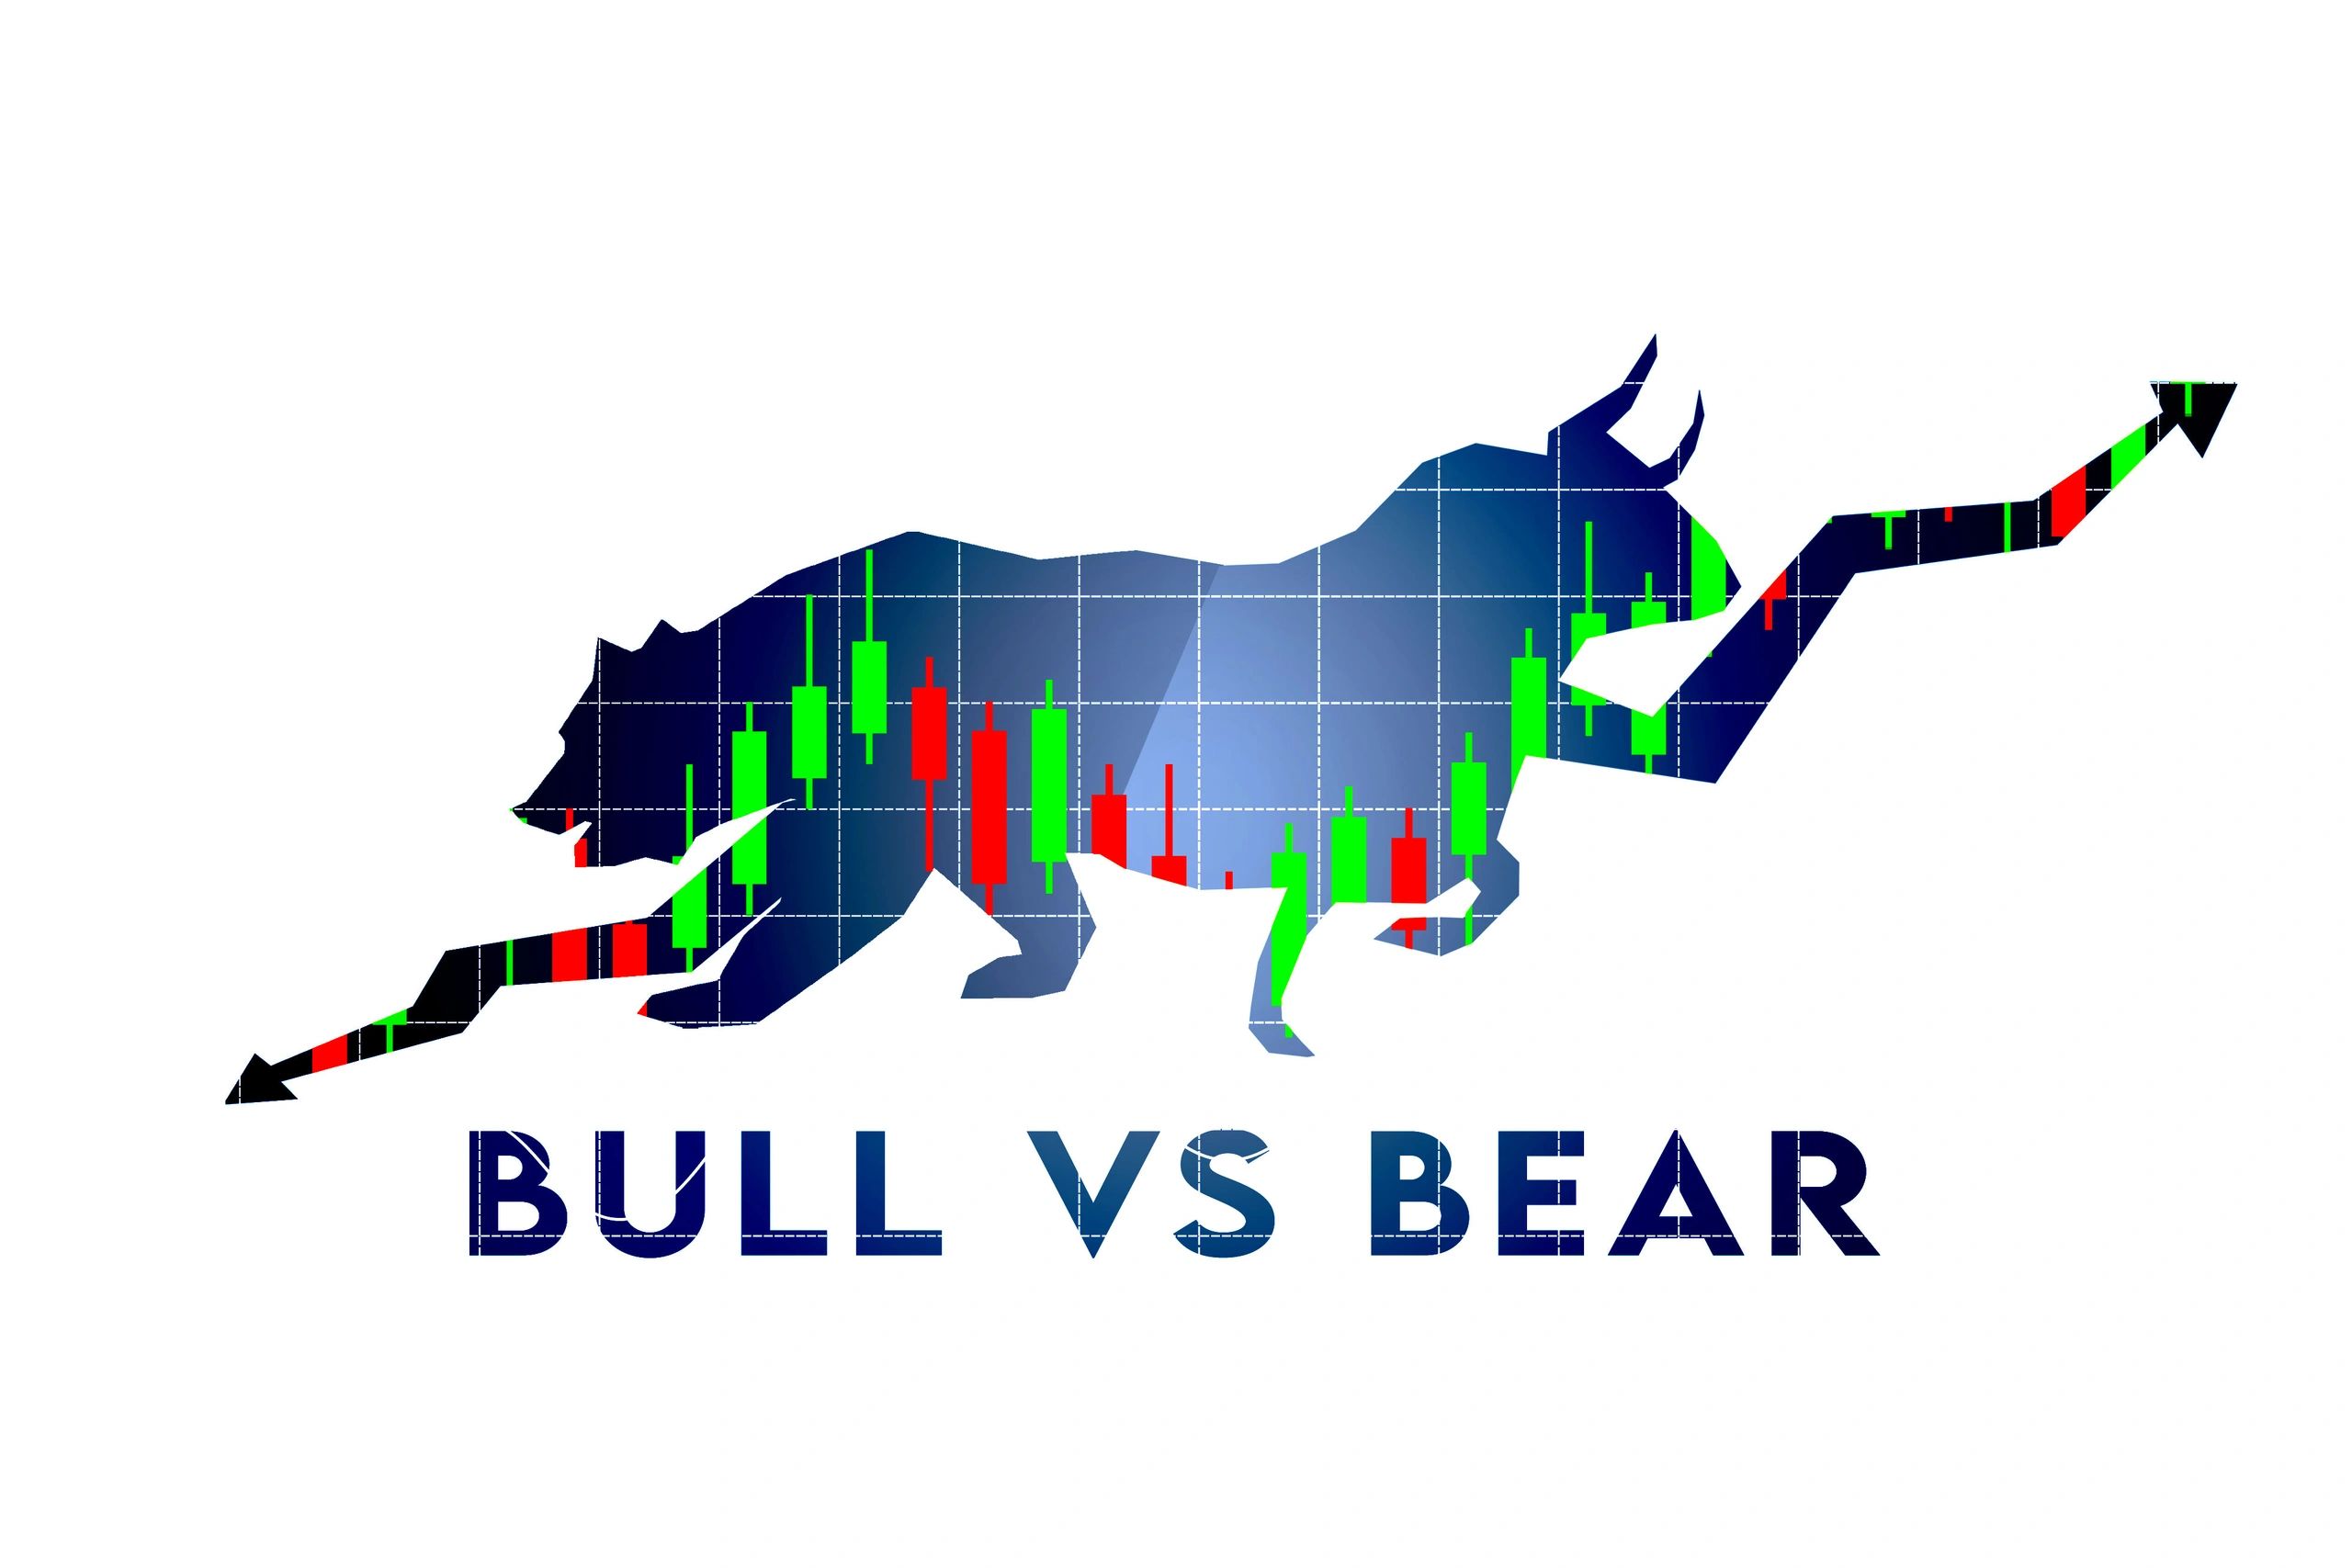 MARKET CYCLES UNDERSTANDING BULL AND BEAR MARKETS